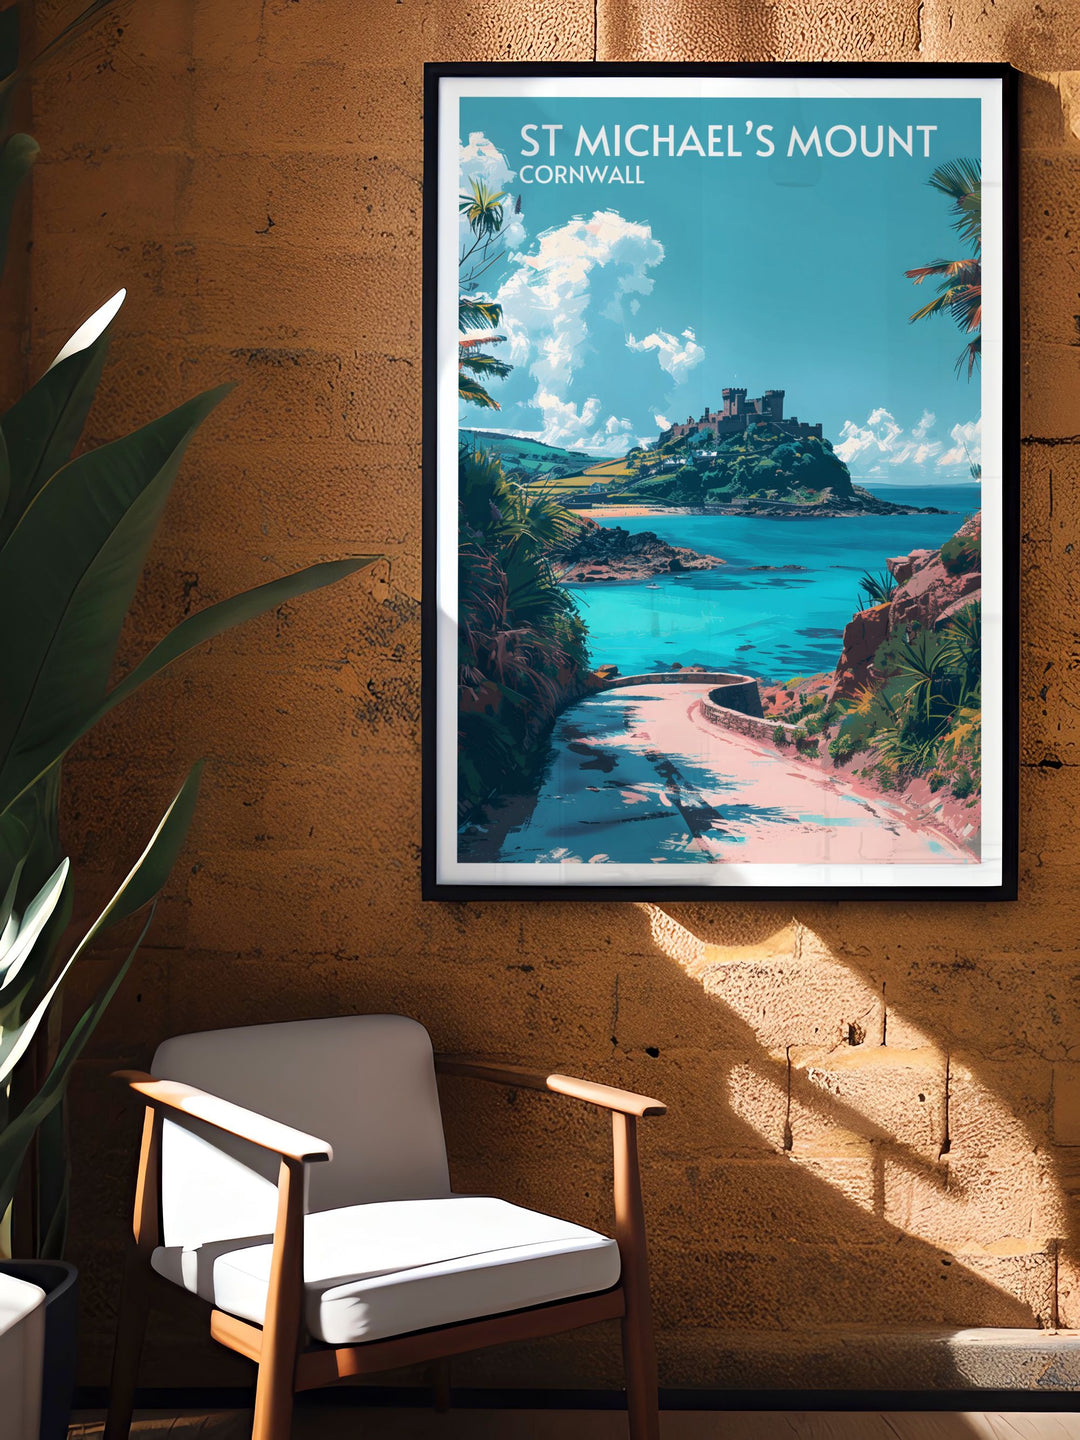 Personalized art of South West Coast allowing customization of favorite scenes from Englands coastal paths creating unique and meaningful decor for your home.